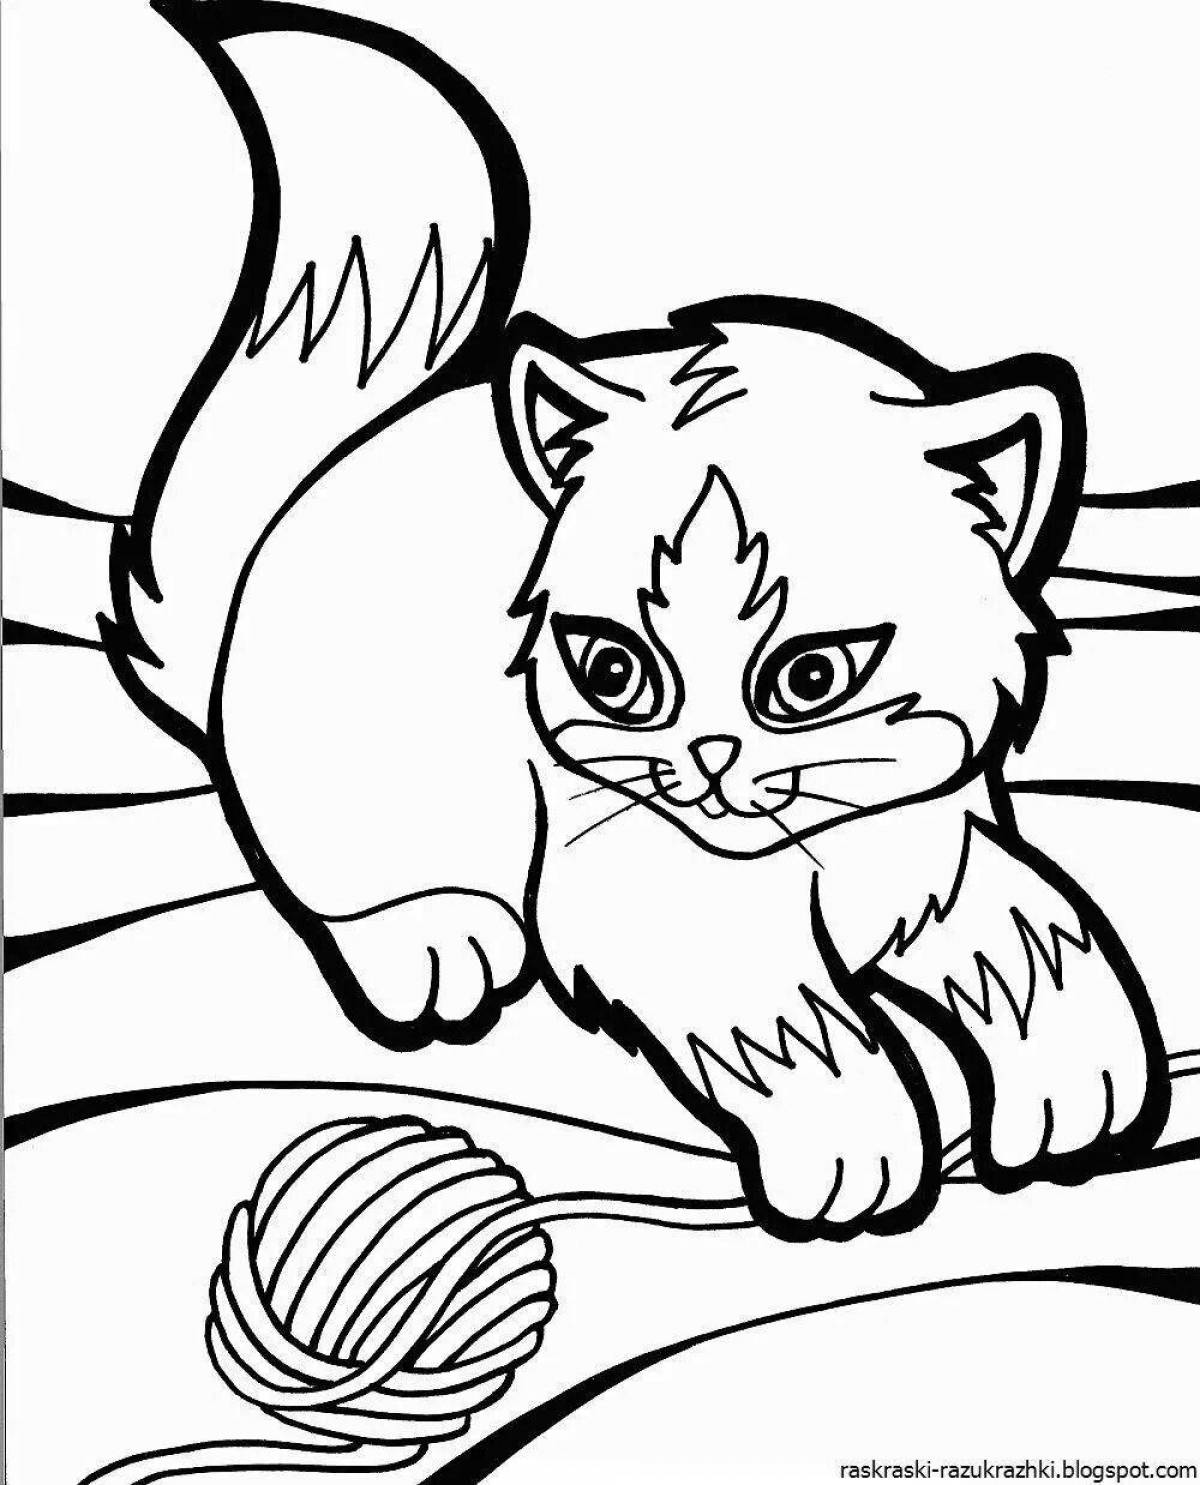 Naughty cat coloring book for kids